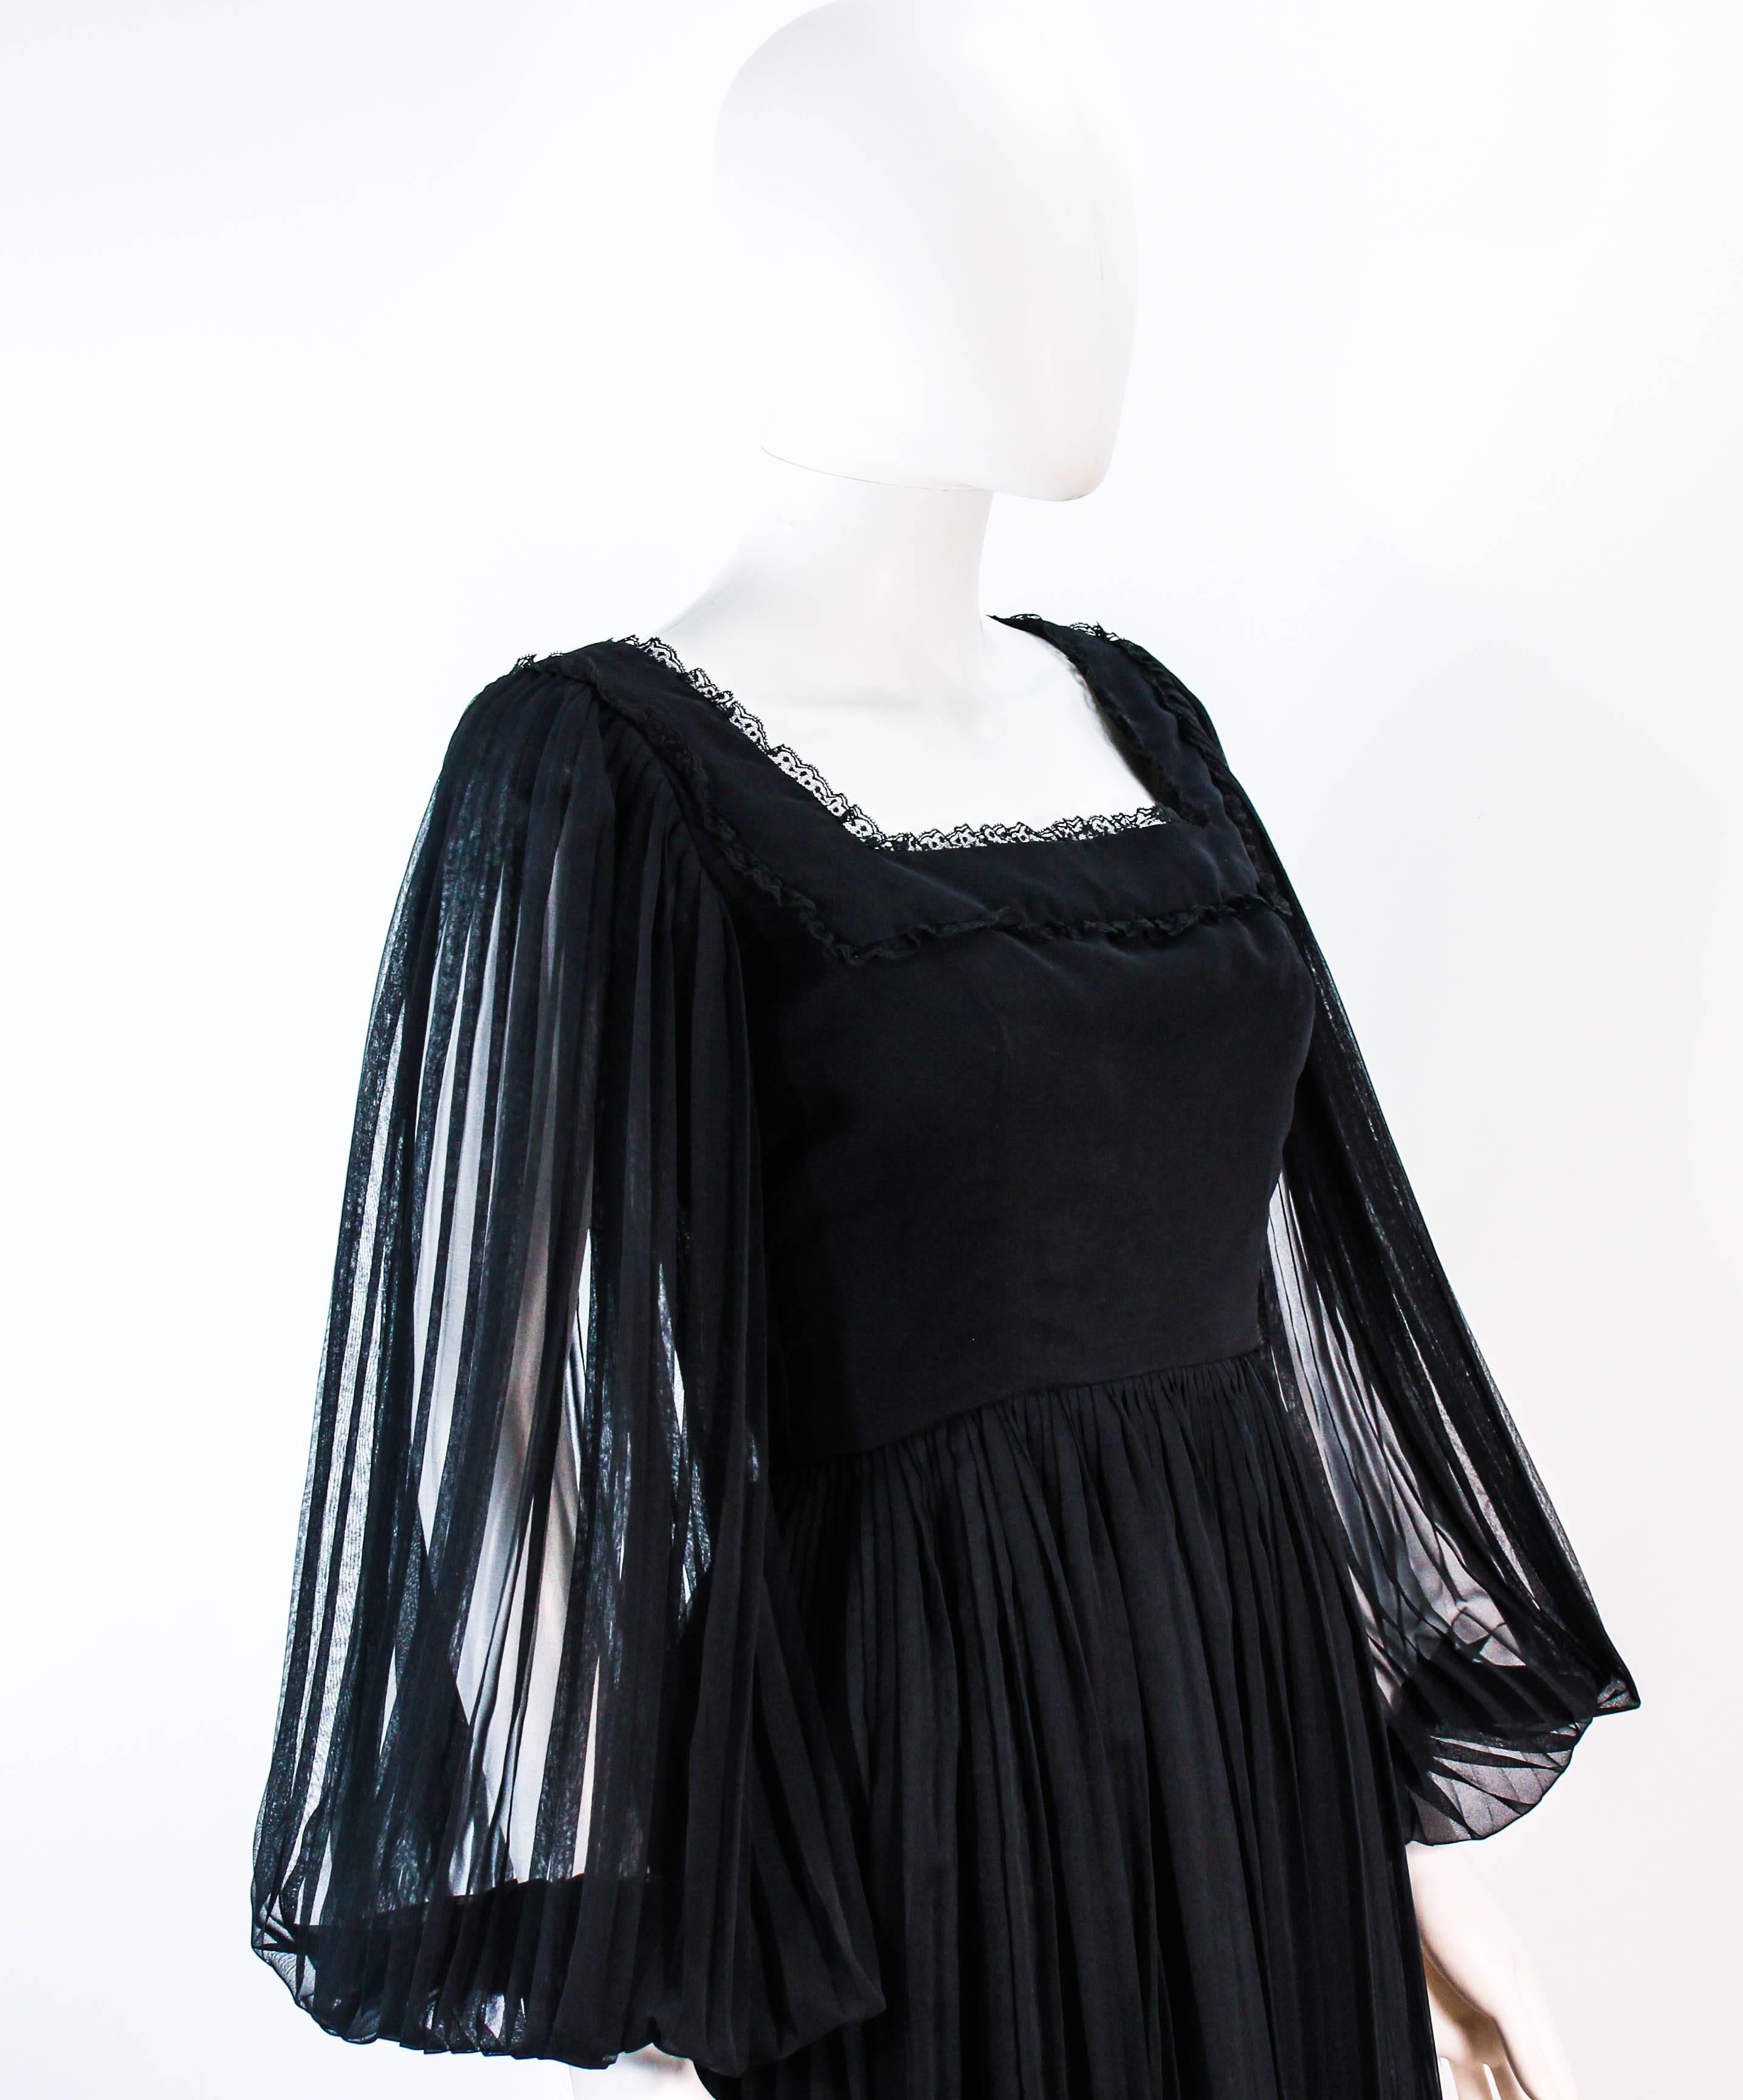 Women's or Men's JEAN LOUIS Black Pleated Lace Dress with Sheer Sleeves Size 4 6 For Sale